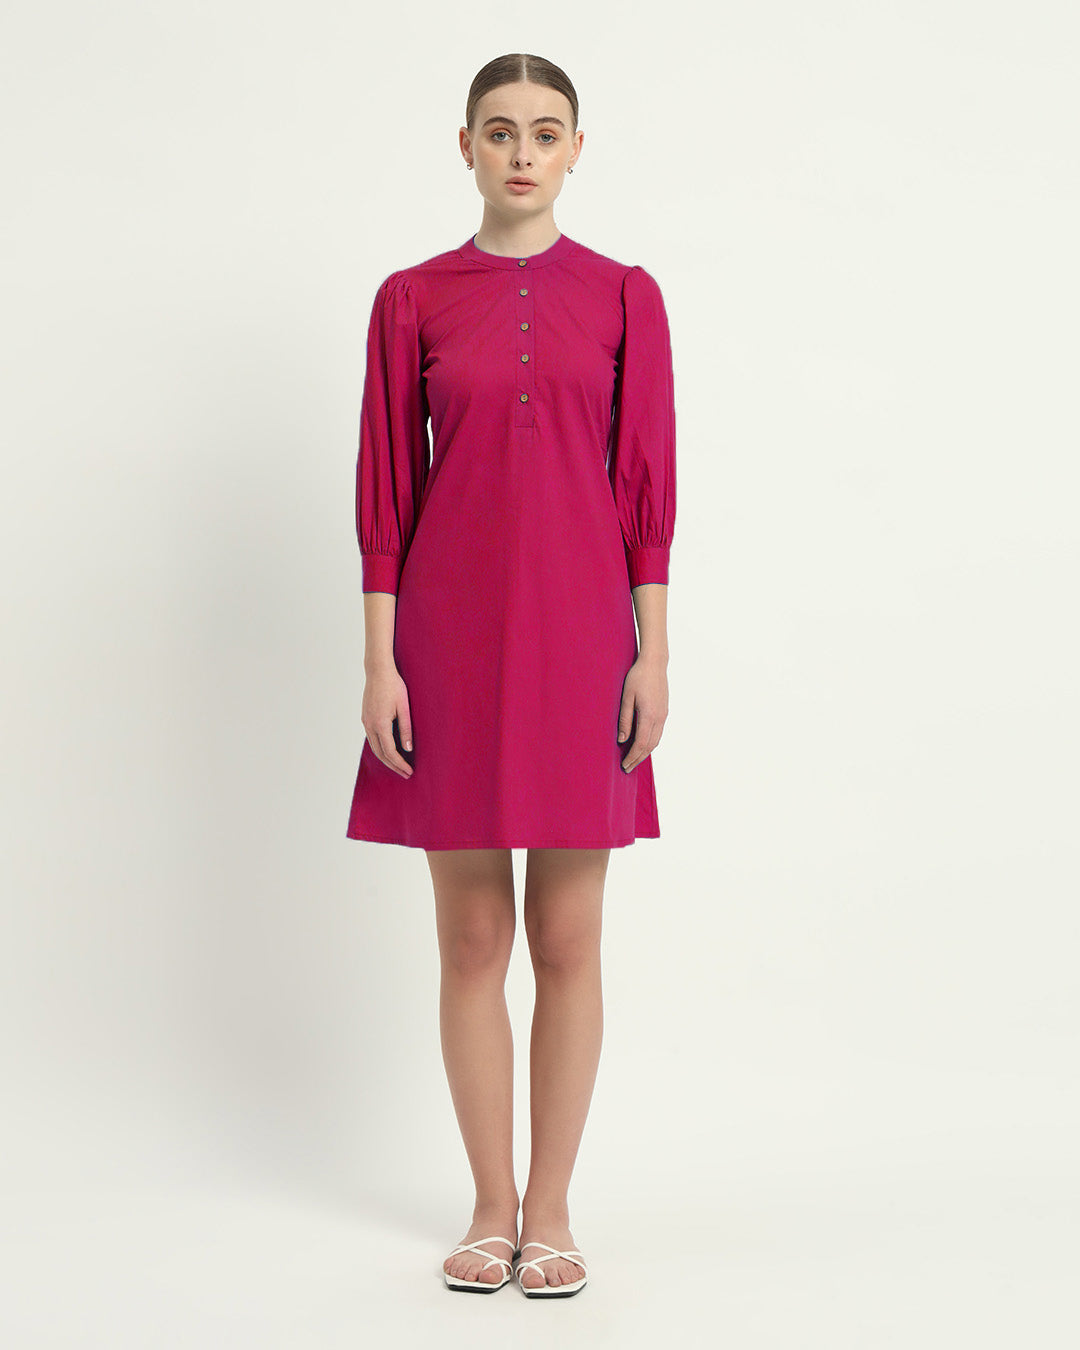 The Roslyn Berry Cotton Dress